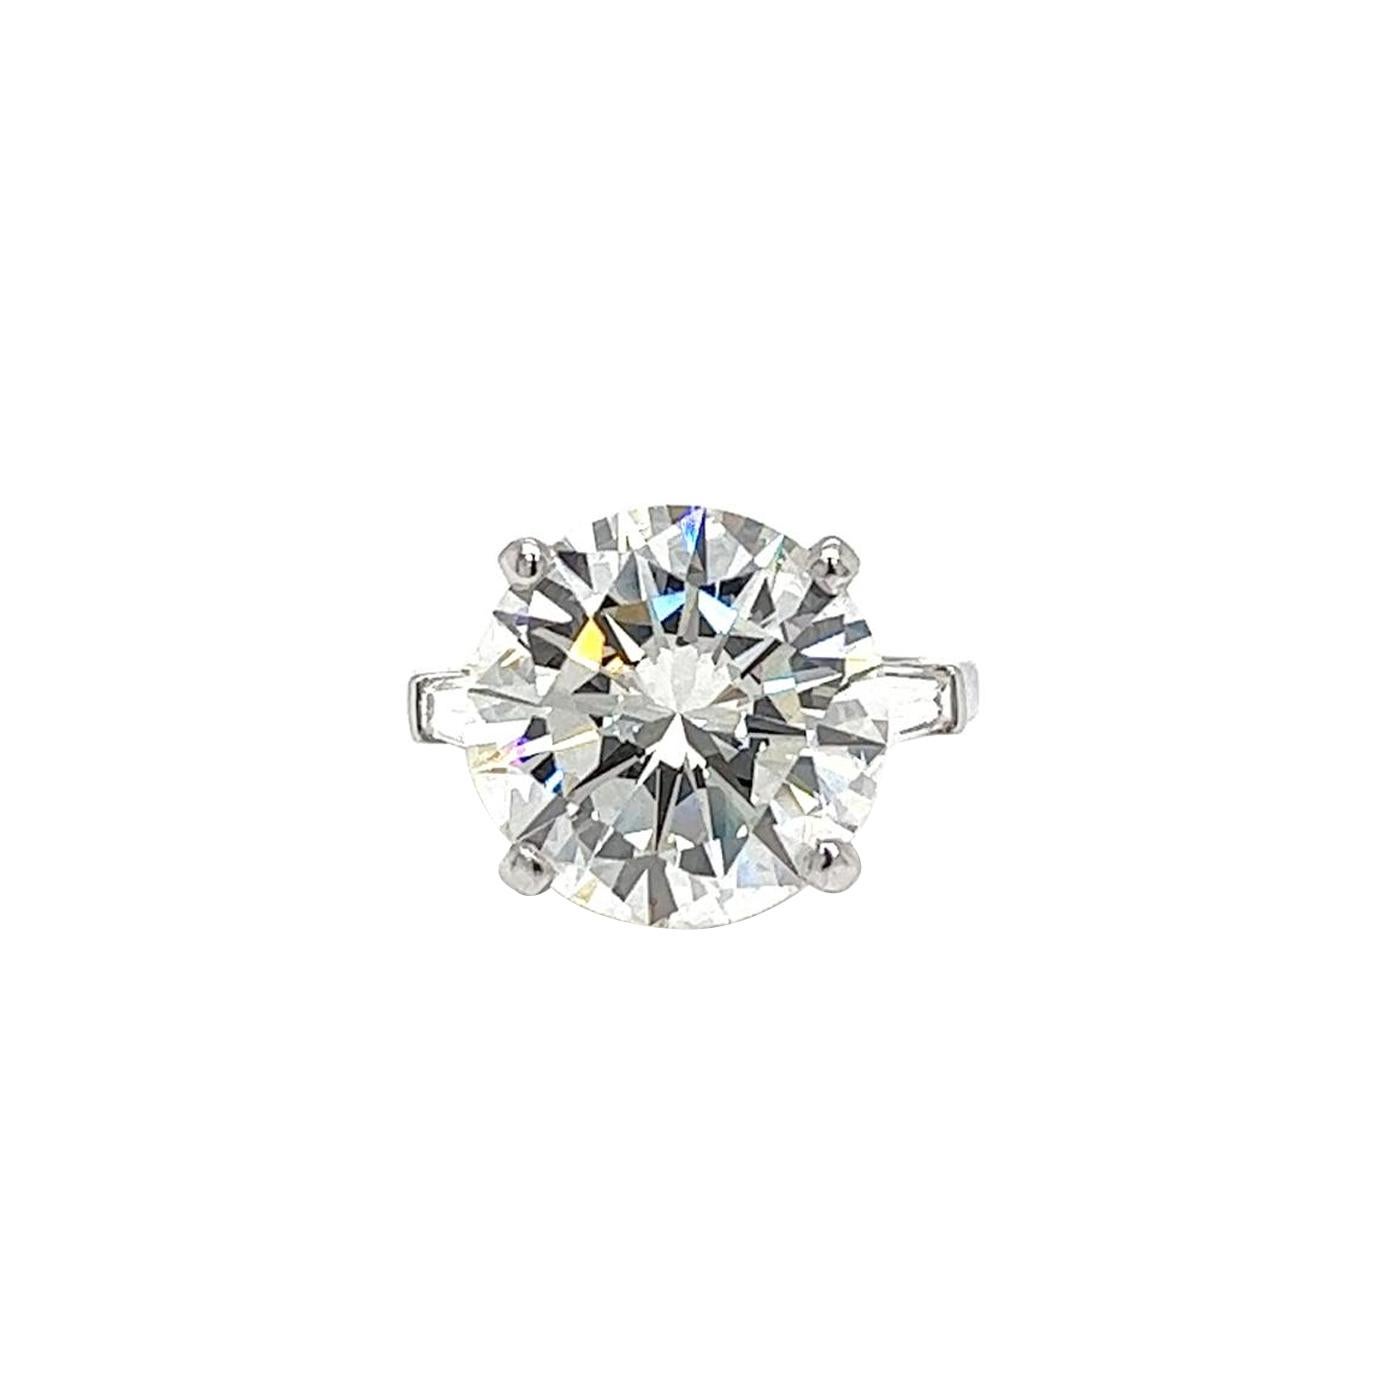 A breathtakingly beautiful diamond ring featuring an eye-clean diamond that radiates with exceptional clarity. The diamond is impressive and features a round brilliant-cut natural diamond with a weight of 10.01 carats. boasting a J color and VS2